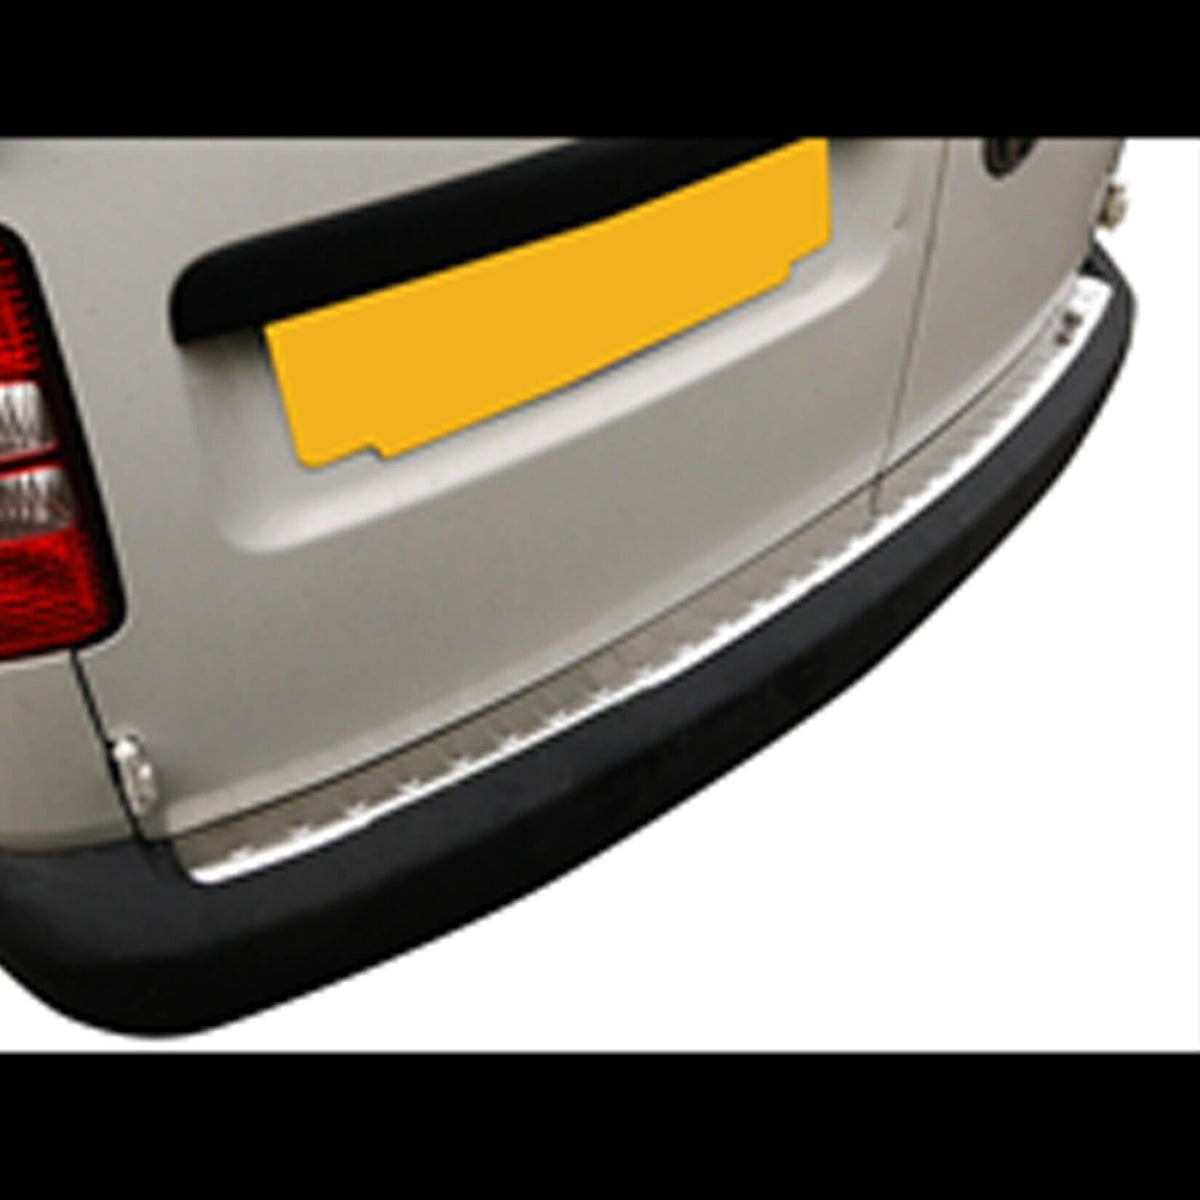 VW CADDY 2004-2014 STAINLESS STEEL REAR BUMPER PROTECTOR - Storm Xccessories2